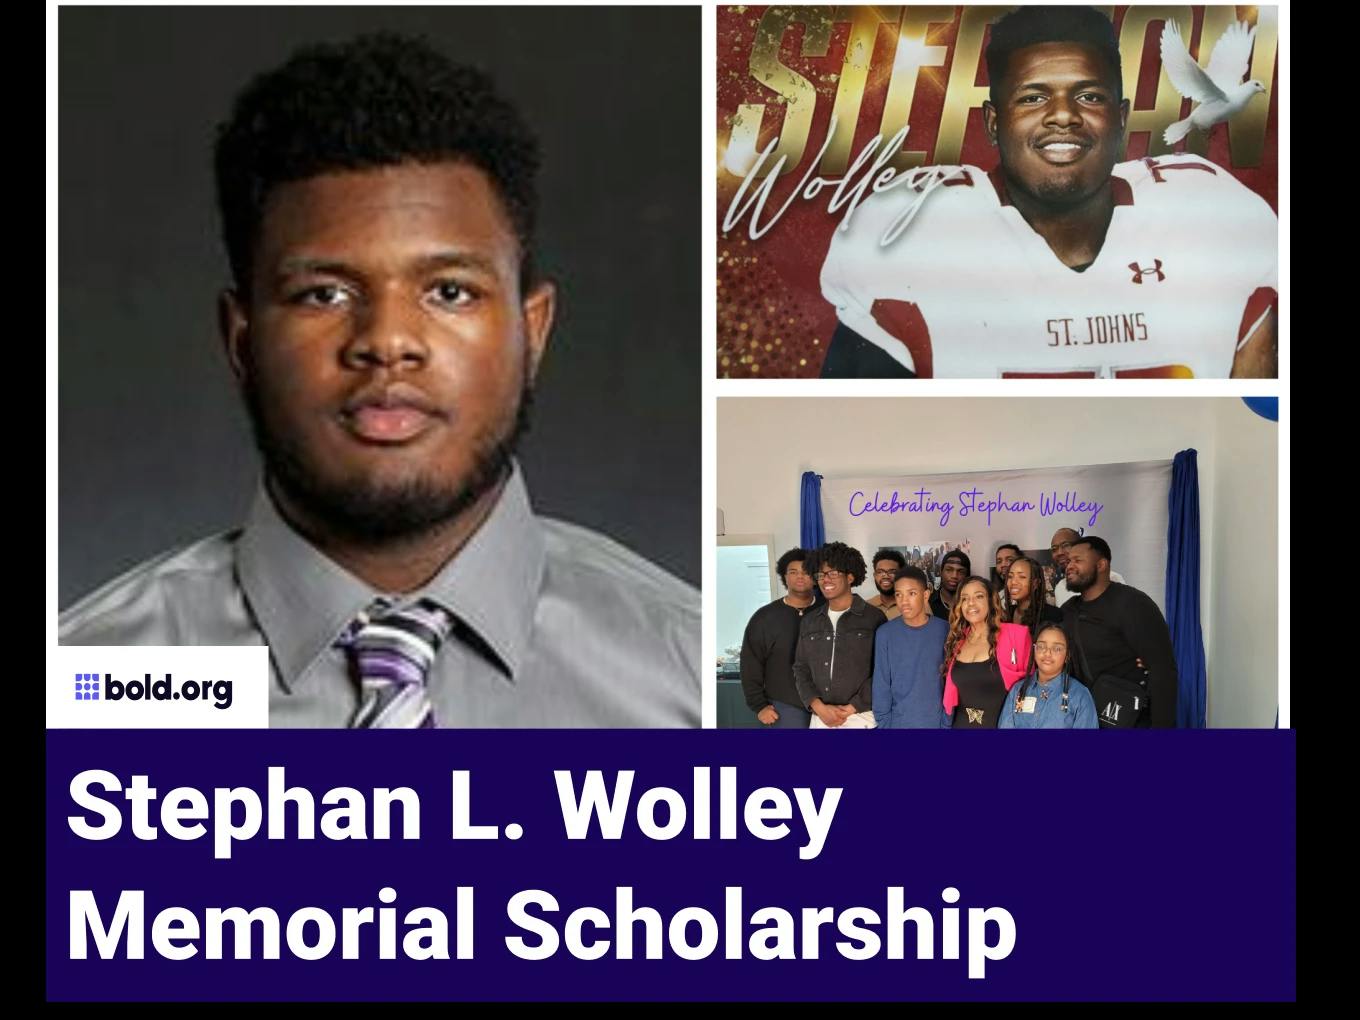 Stephan L. Wolley Memorial Scholarship